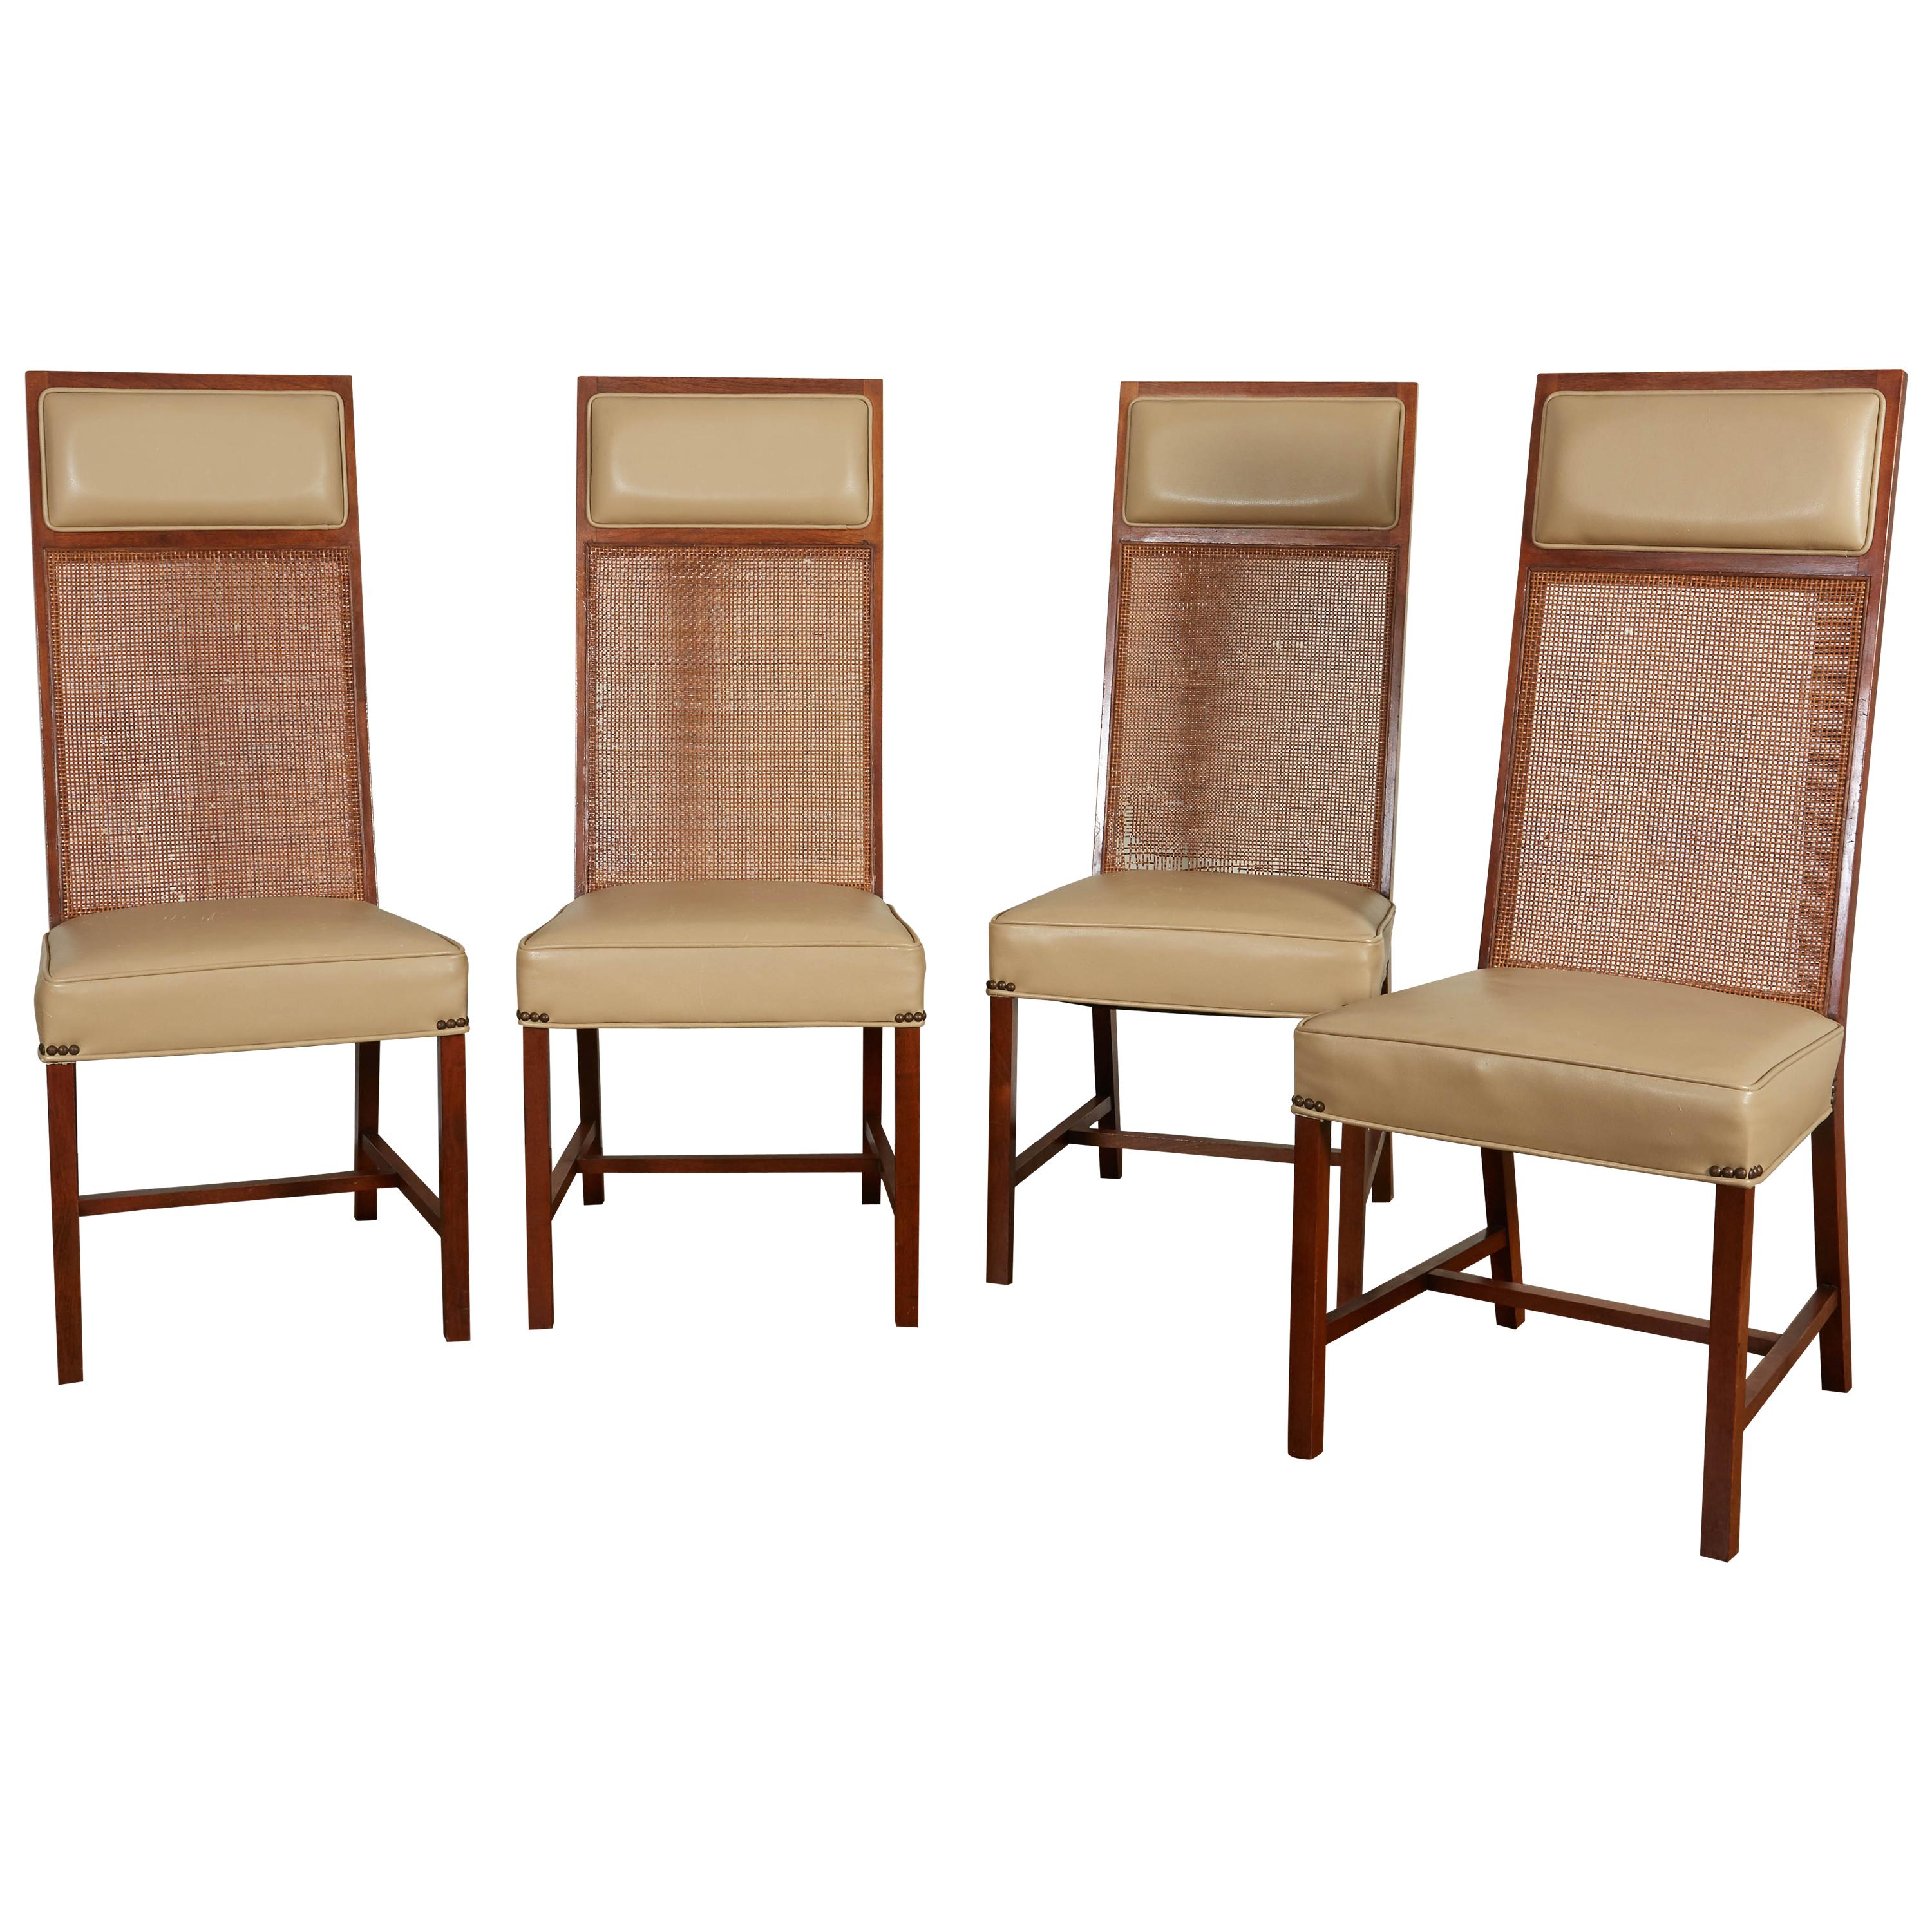 Set of Four Mid-Century Modern Teak and Caned Side Chairs